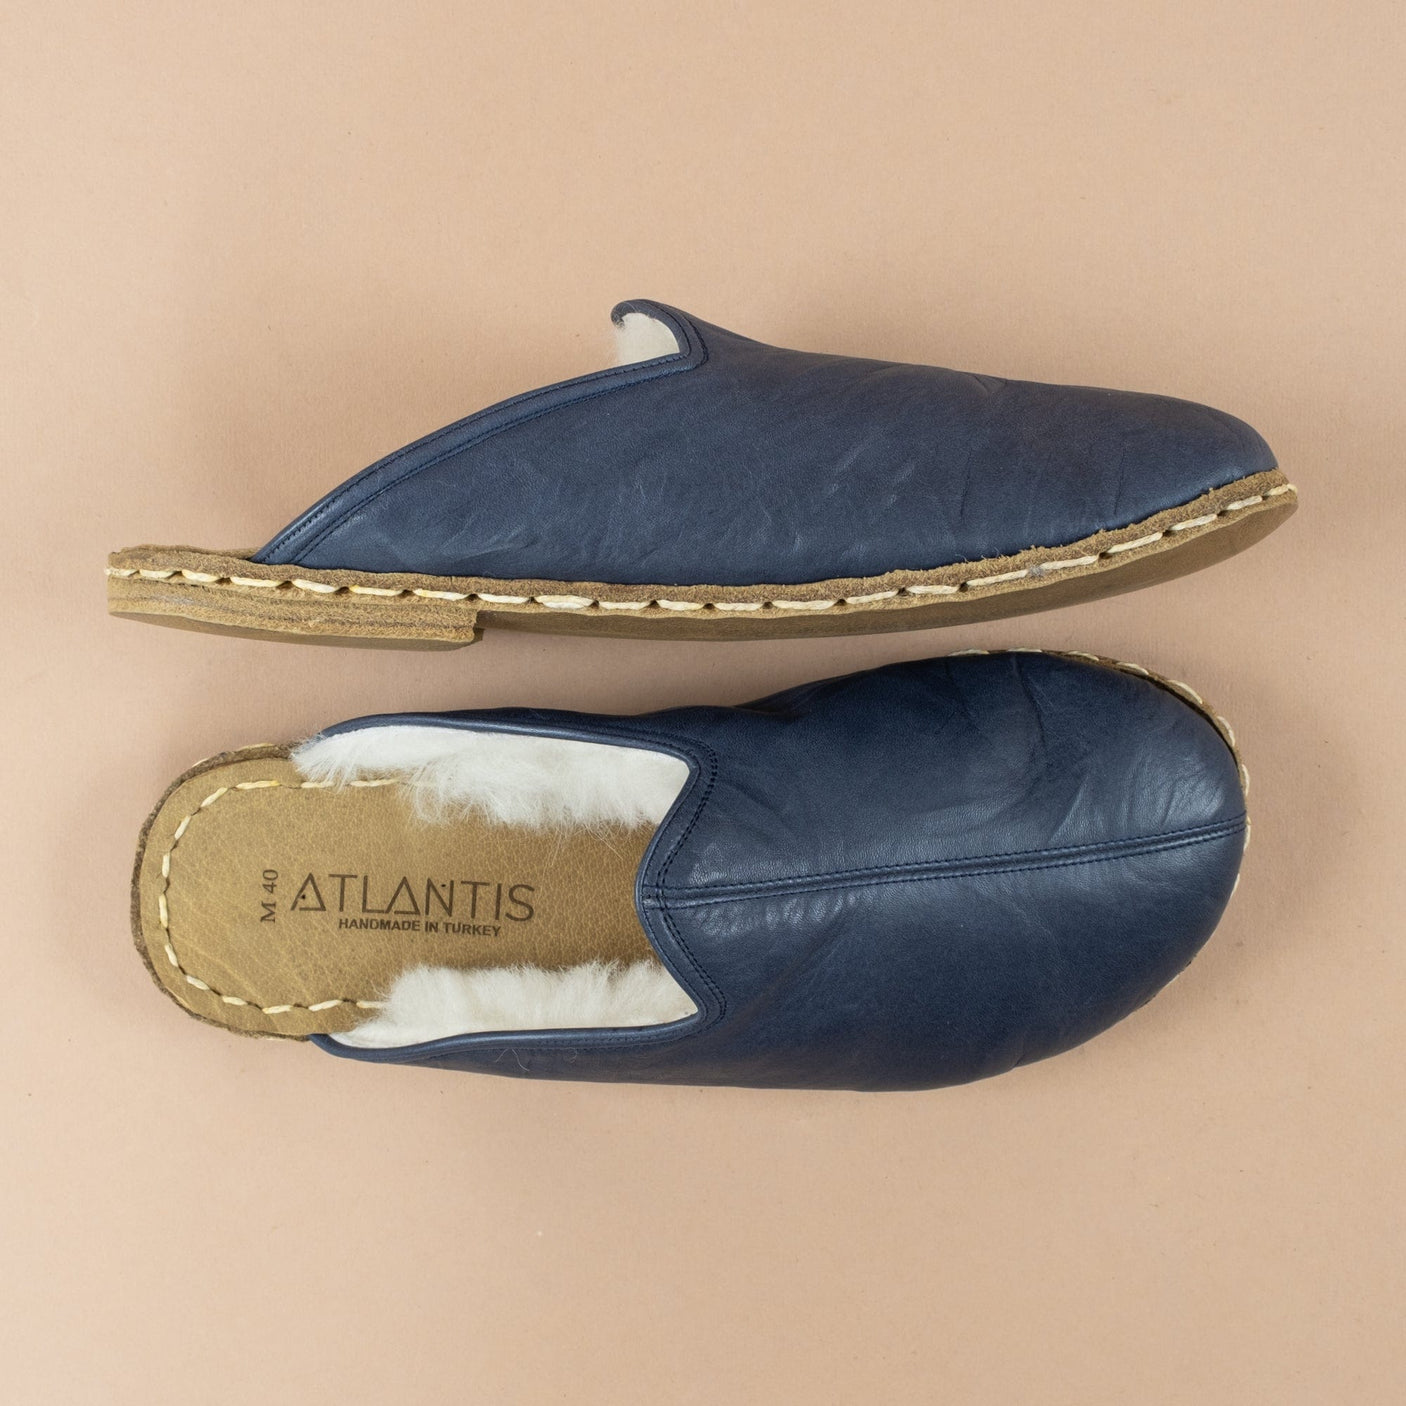 Women's Navy Leather Barefoot Shearling Slippers